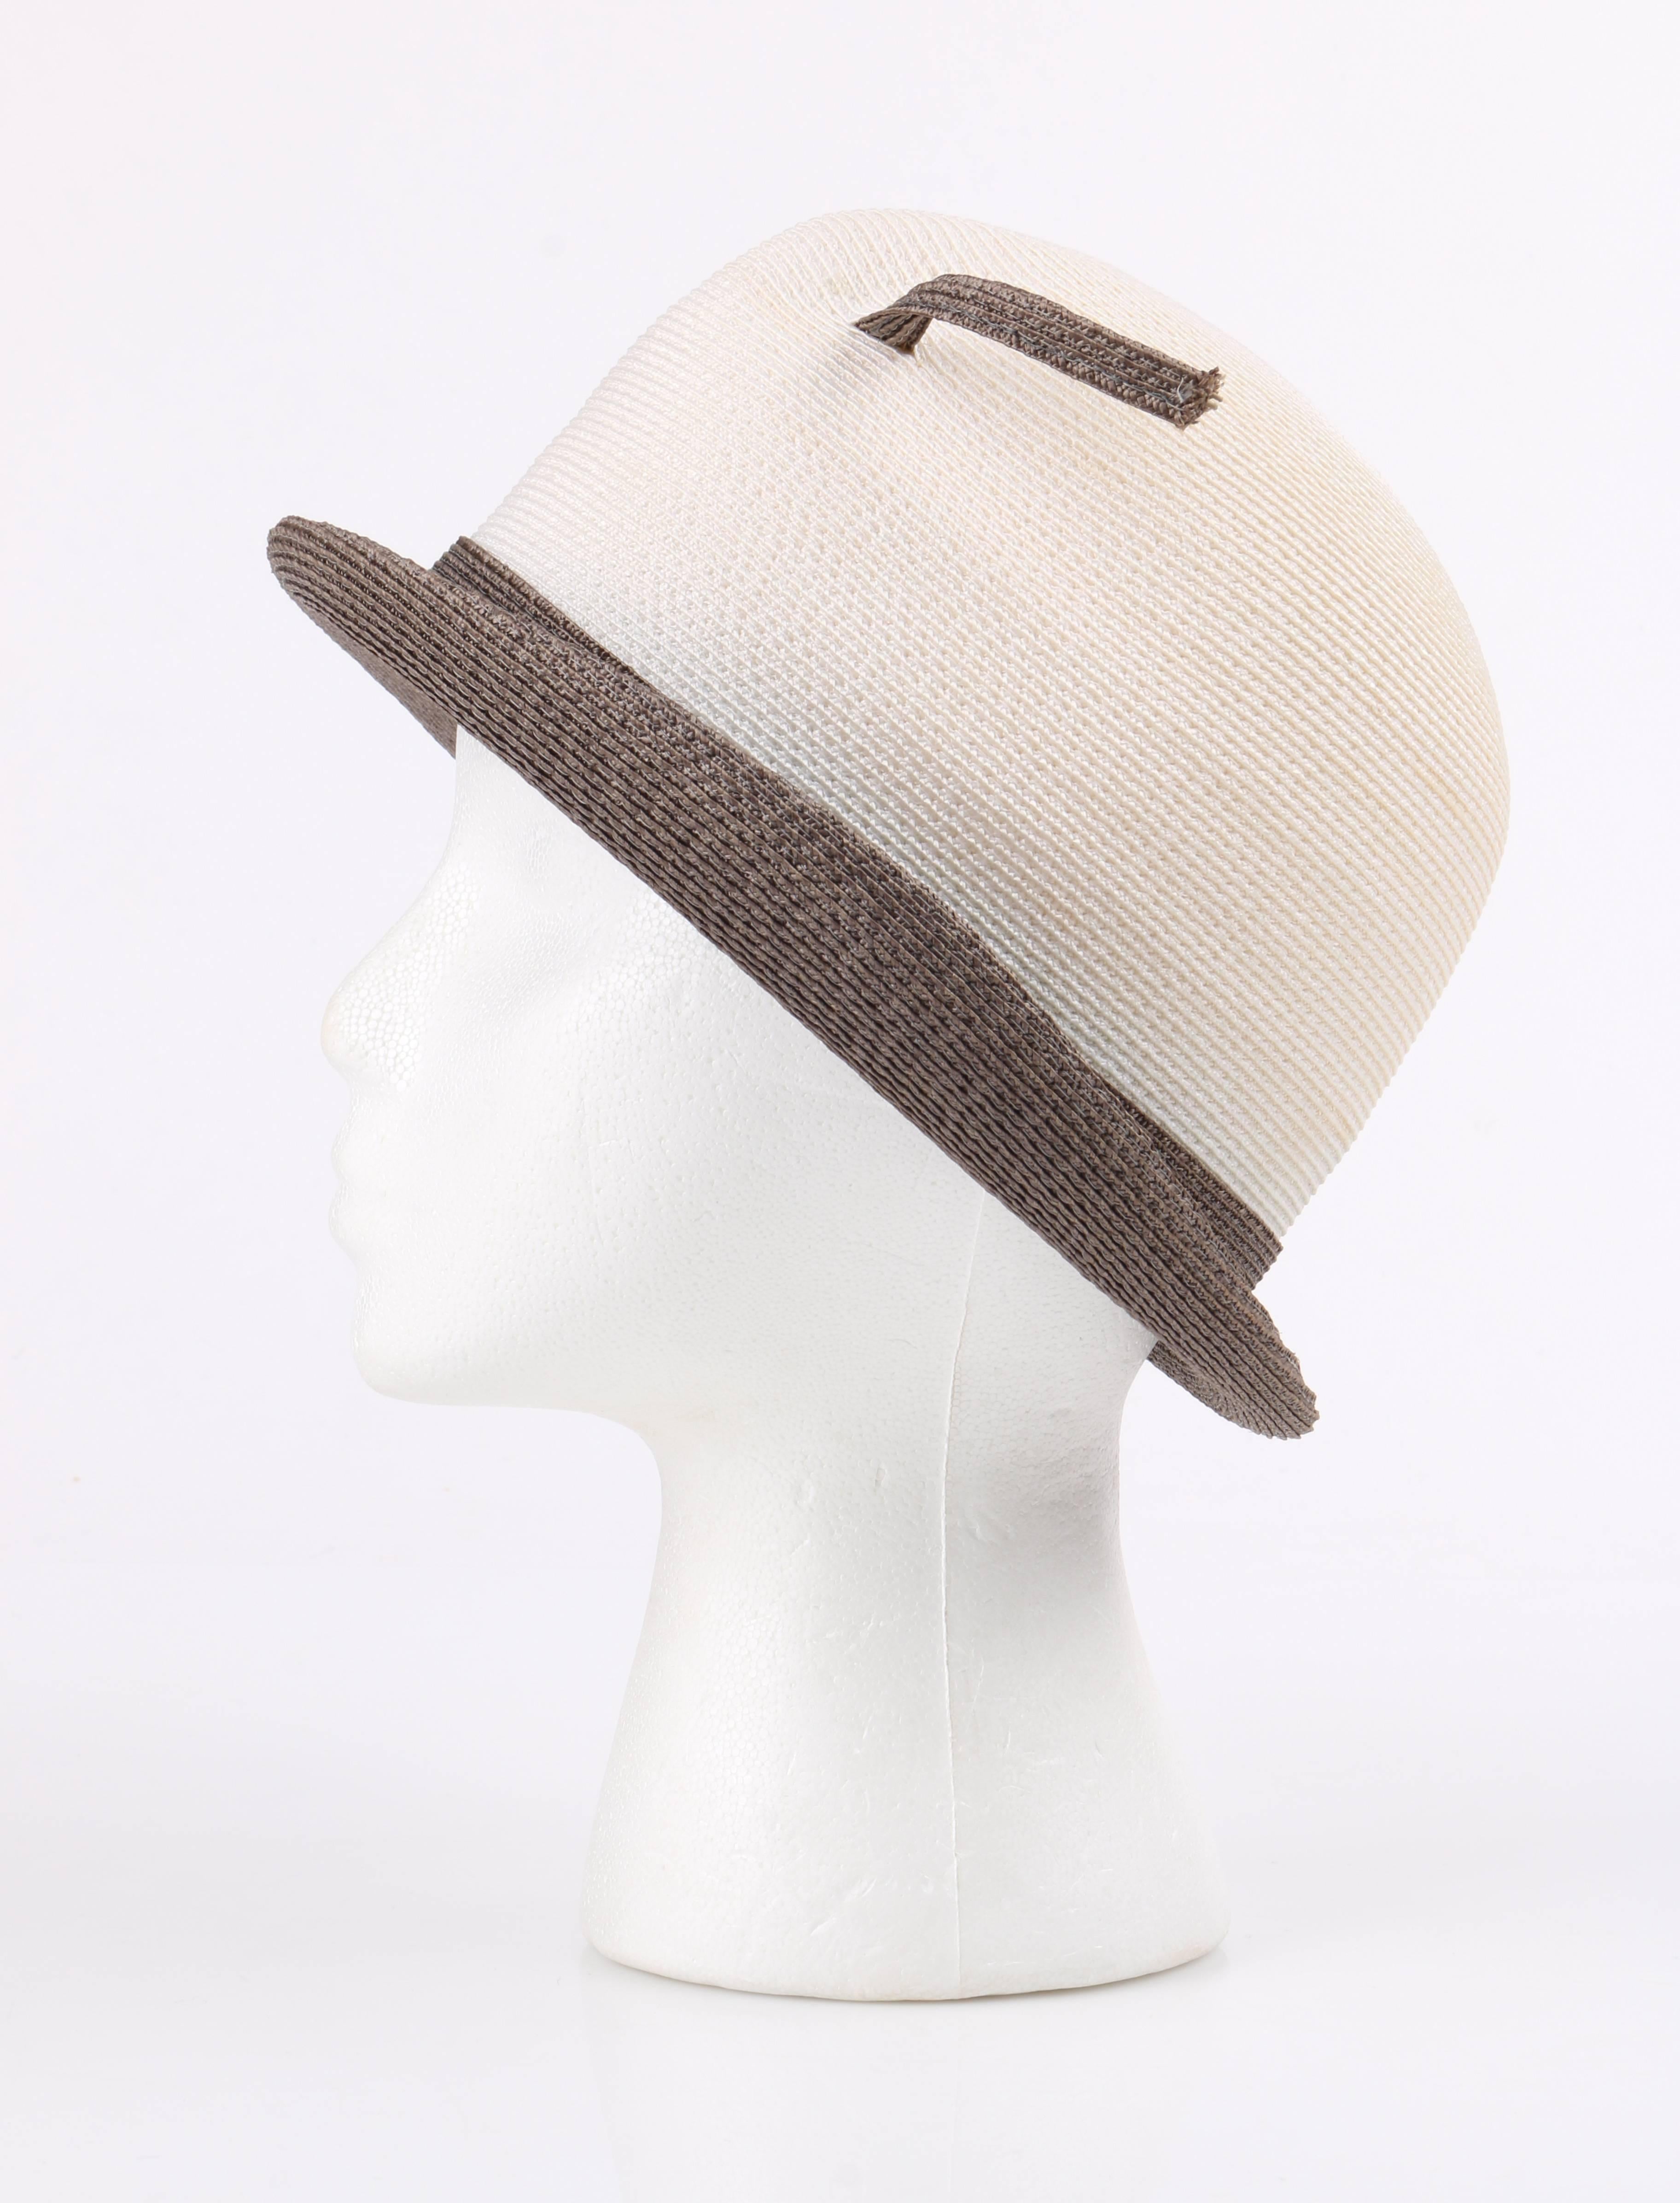 Women's YVES SAINT LAURENT c.1960's YSL Off White Taupe Straw Sculptural Leaf Cloche Hat